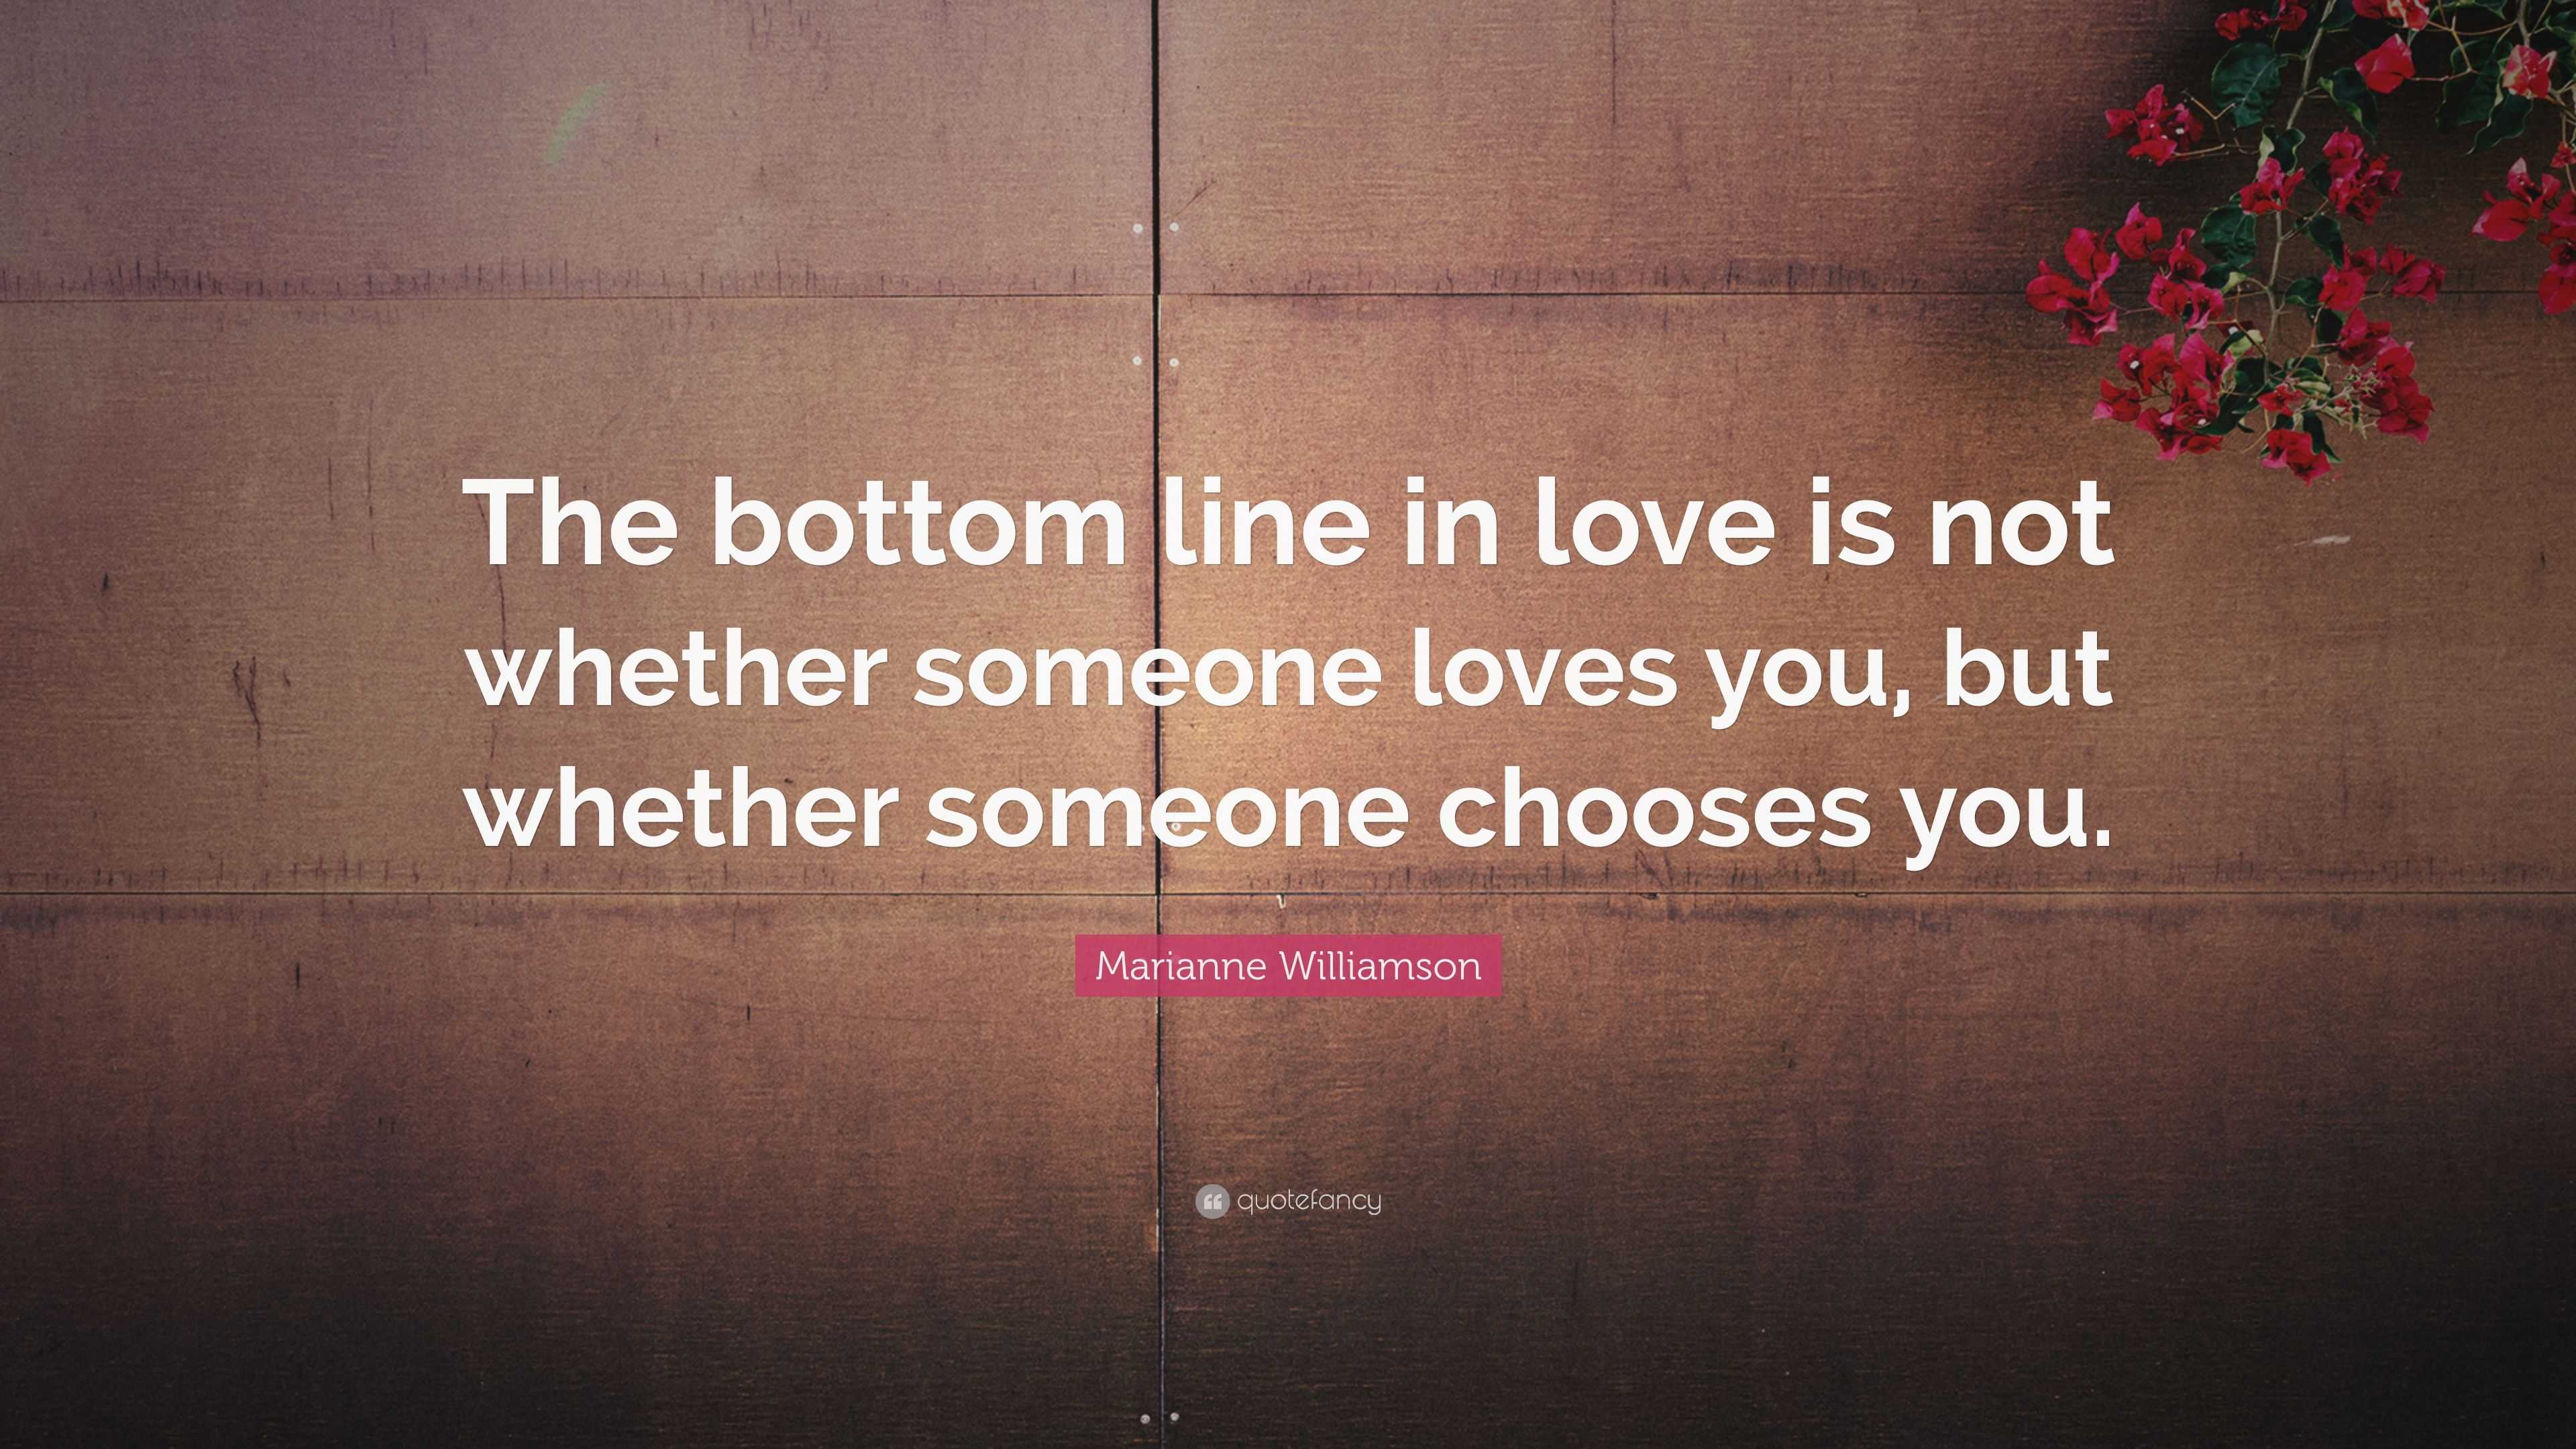 Marianne Williamson Quote “The bottom line in love is not whether someone loves you